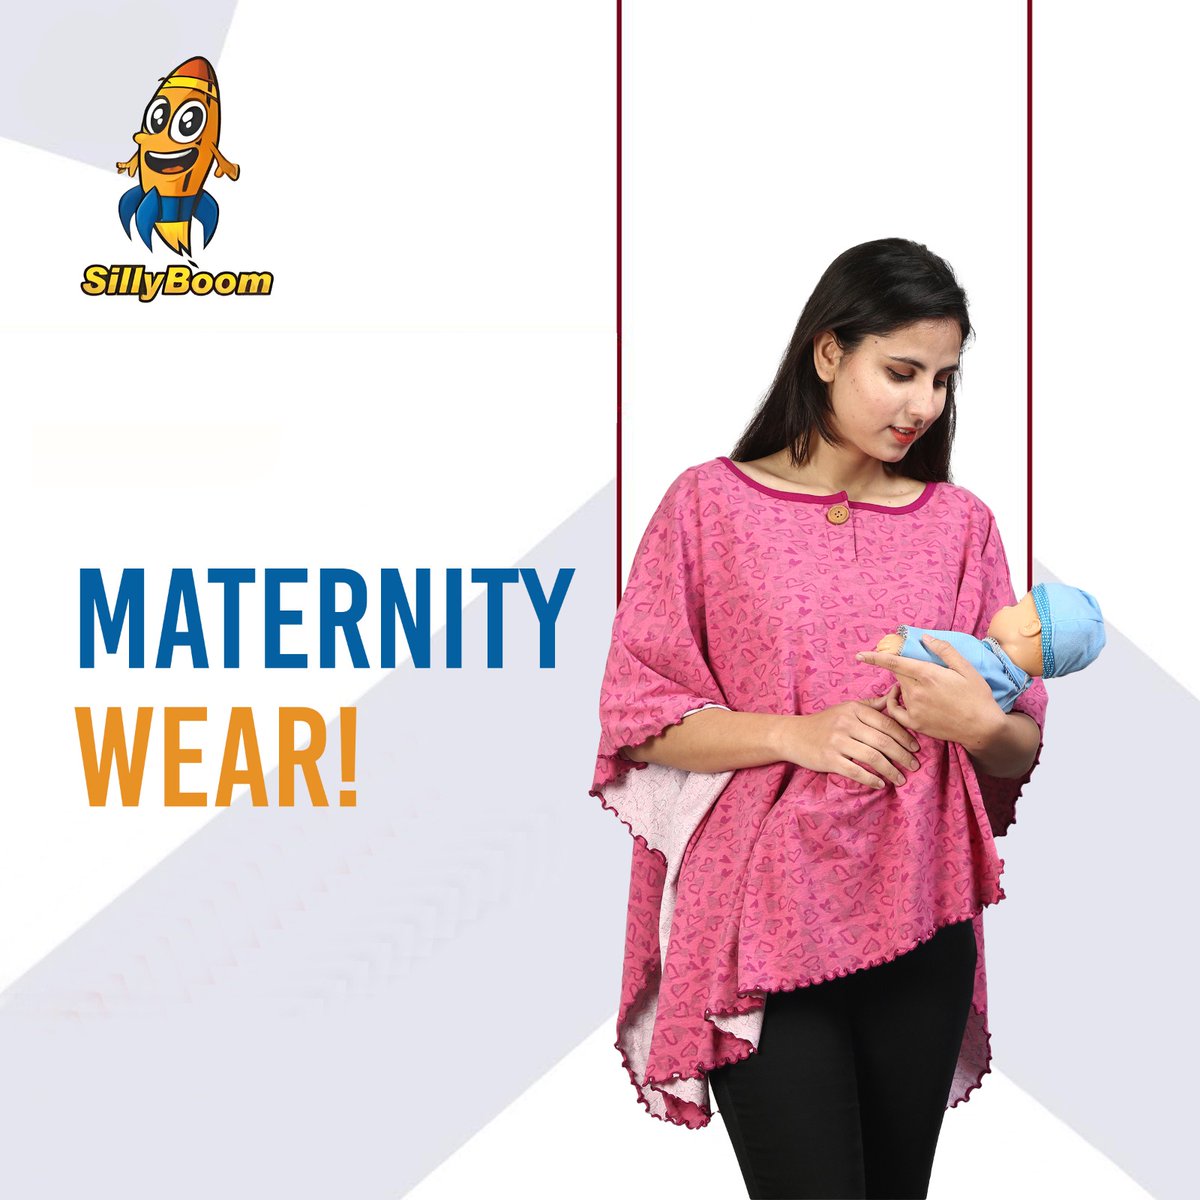 Perfect for postpartum nursing moms, our design is loose and long enough to flatter your post-baby body. It's convenient for breastfeeding and great for all your post-baby outings.
.
#PostpartumFashion #NursingMoms #BreastfeedingFriendly #PostpartumBody #NewMomStyle #MomLife